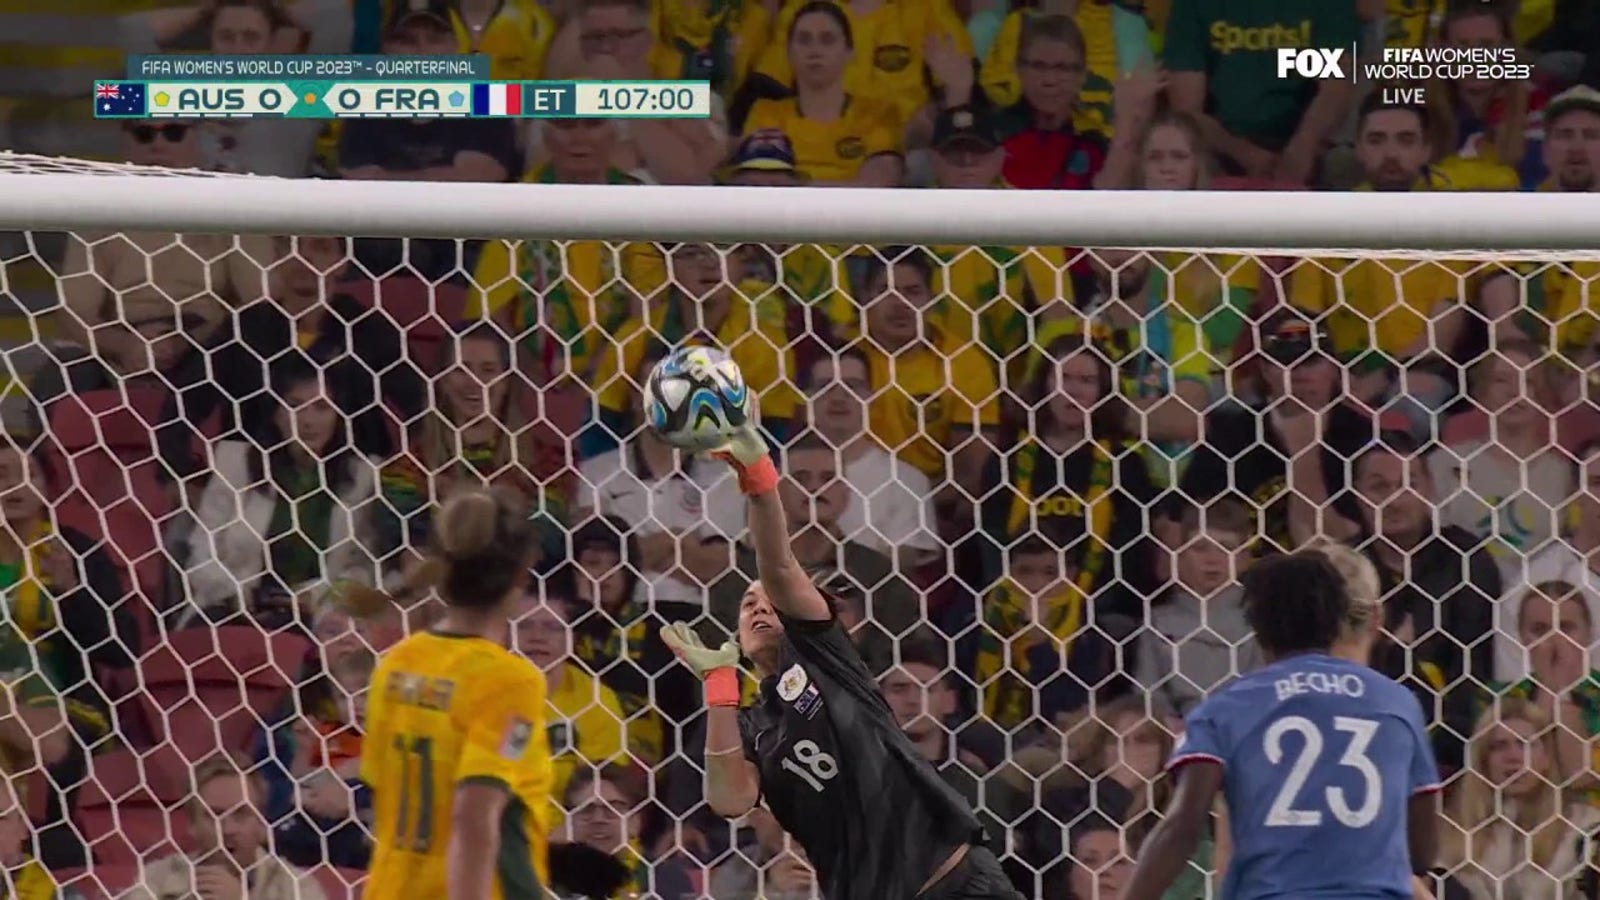 Mackenzie Arnold made another save to keep Australia and France deadlocked 0-0 in extra time